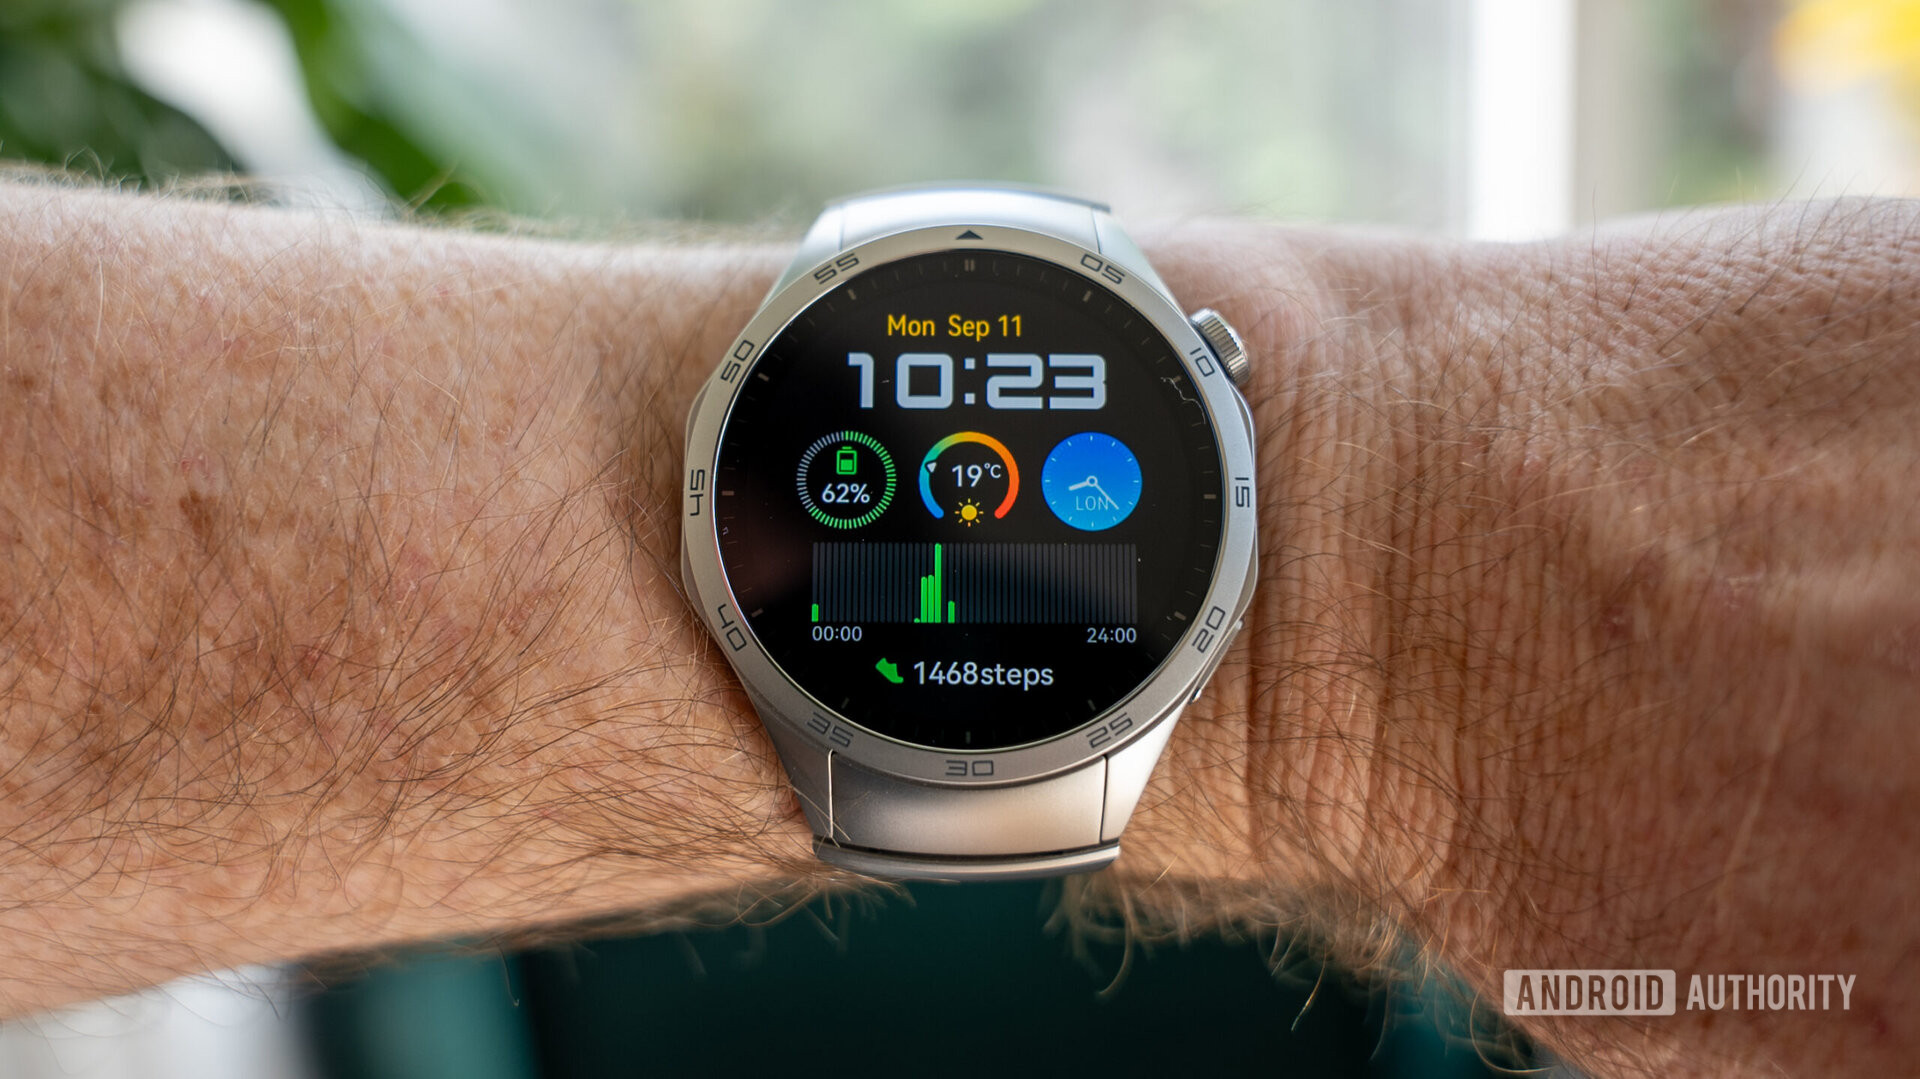 https://www.androidauthority.com/wp-content/uploads/2023/09/Huawei-Watch-GT-4-smartwatch-activity-tracker-watchface-on-wrist-scaled.jpg